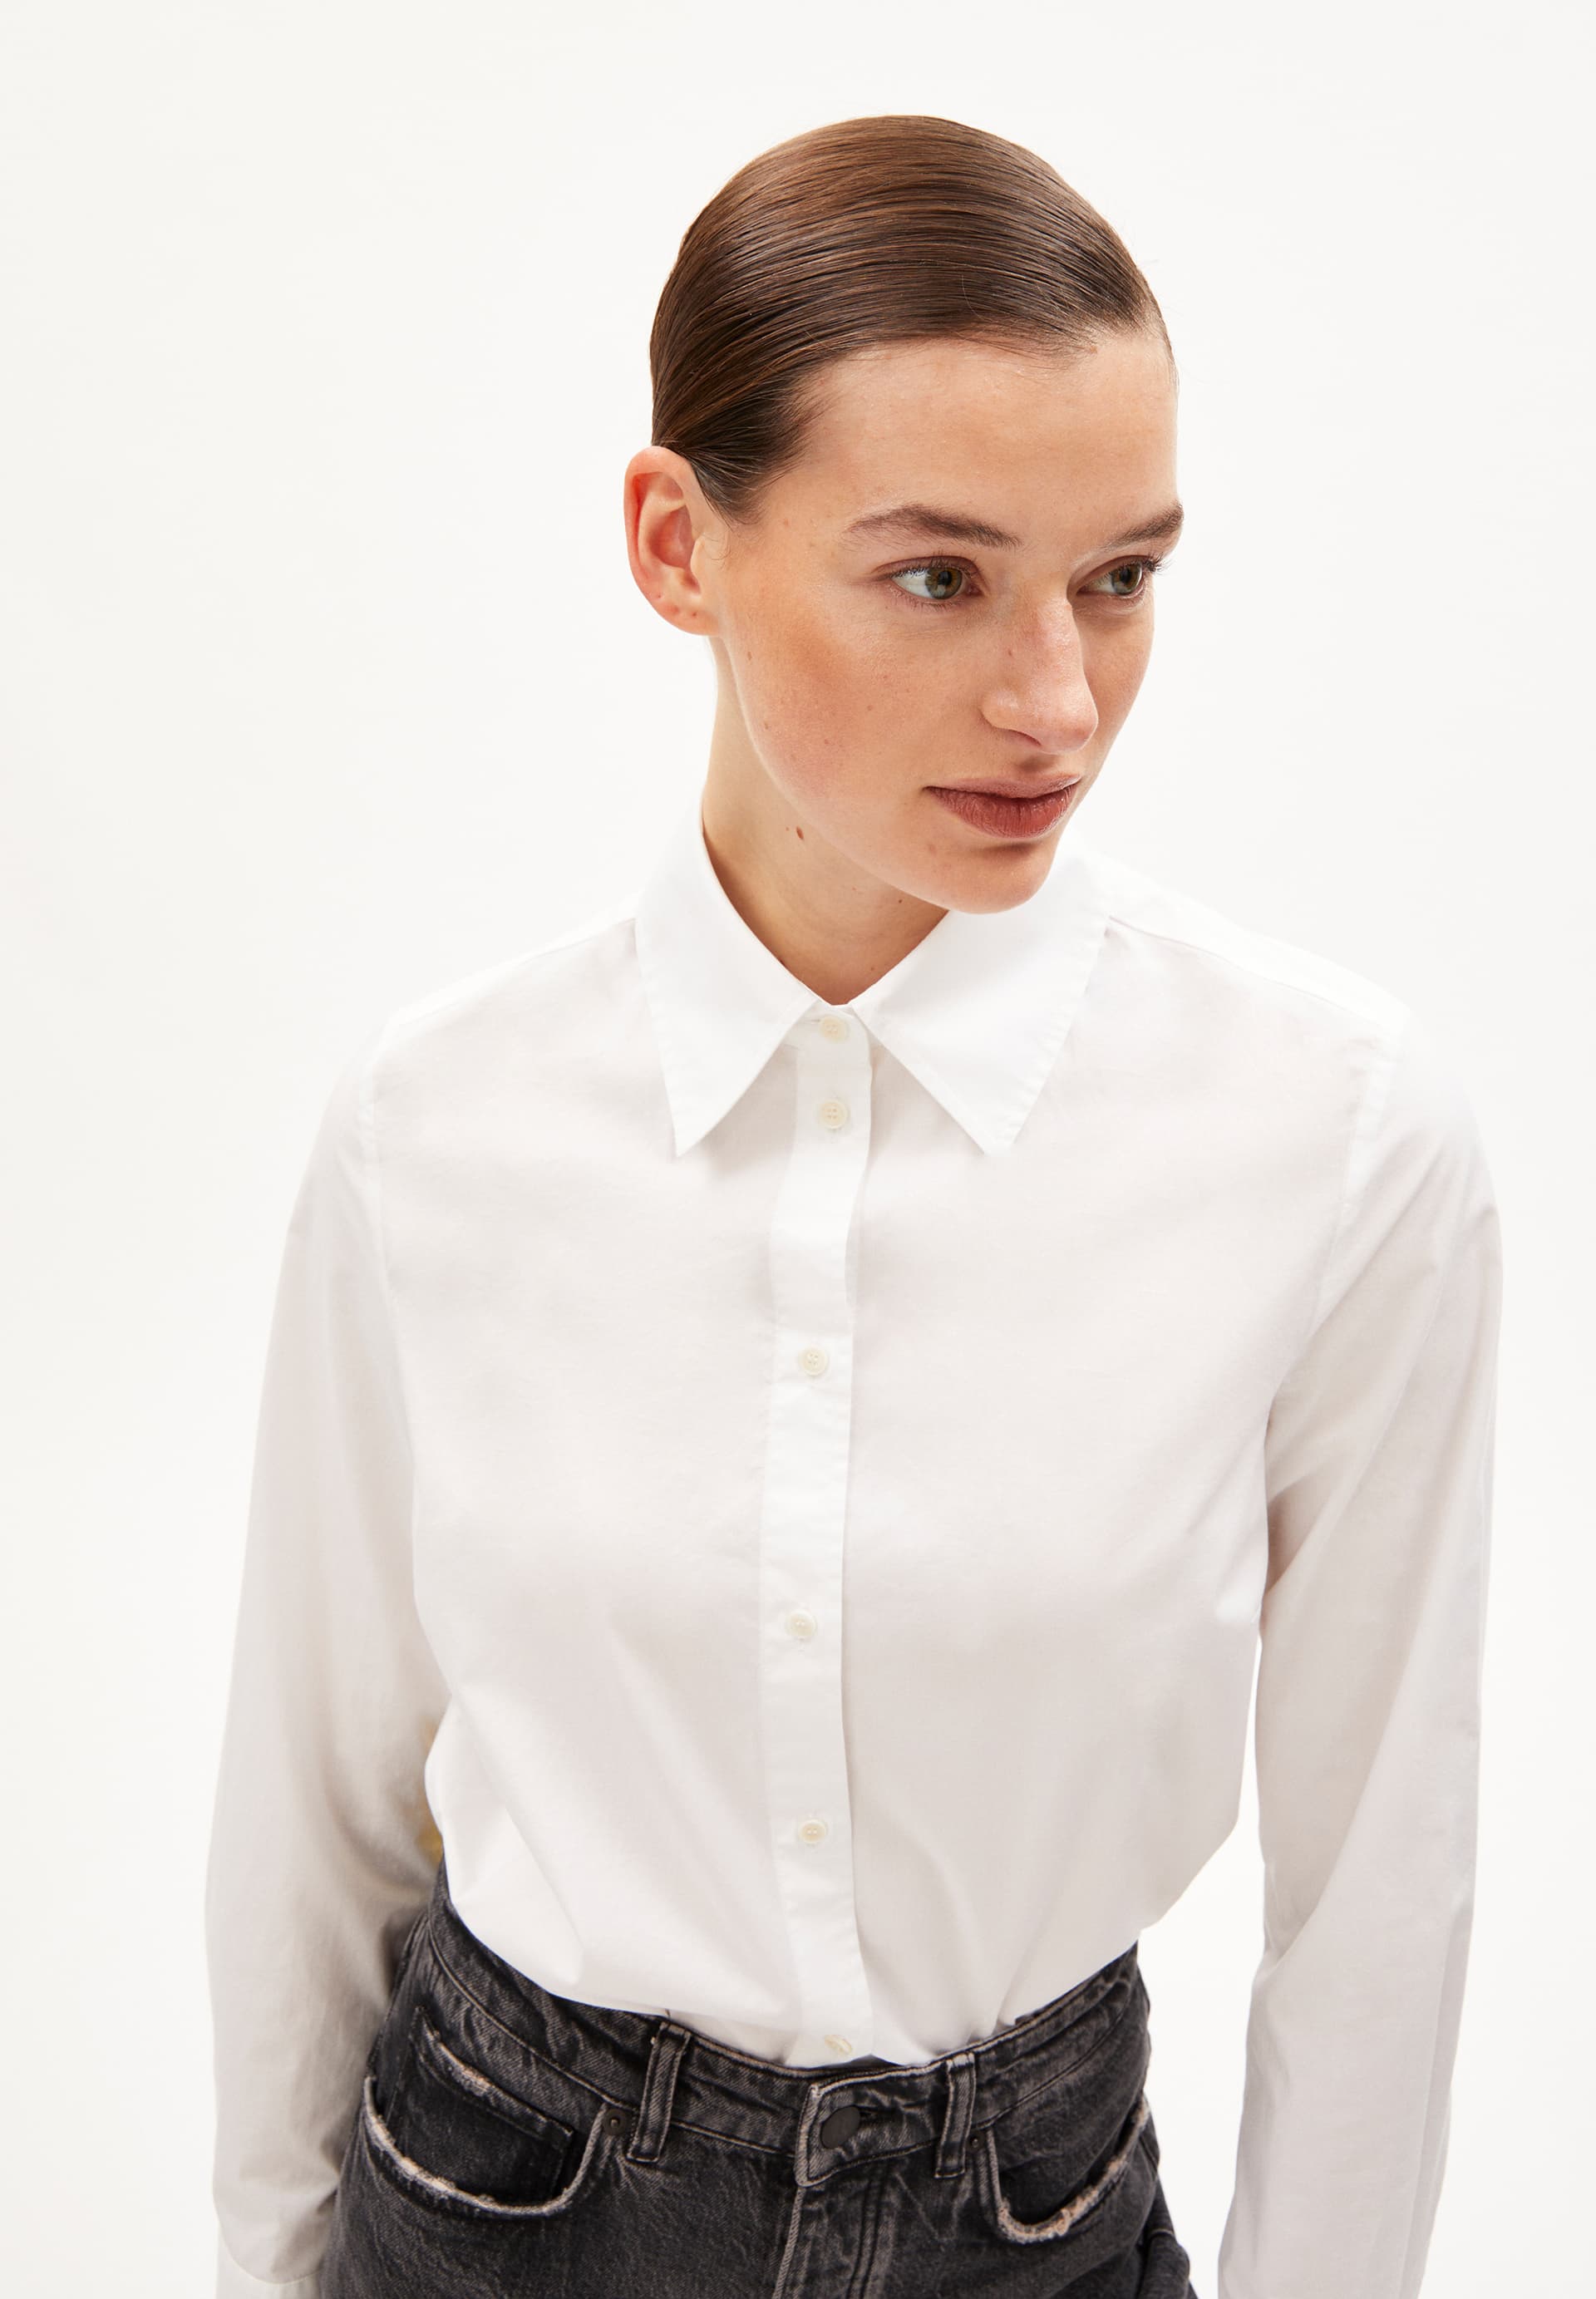 LOUILAA Blouse Relaxed Fit made of Organic Cotton